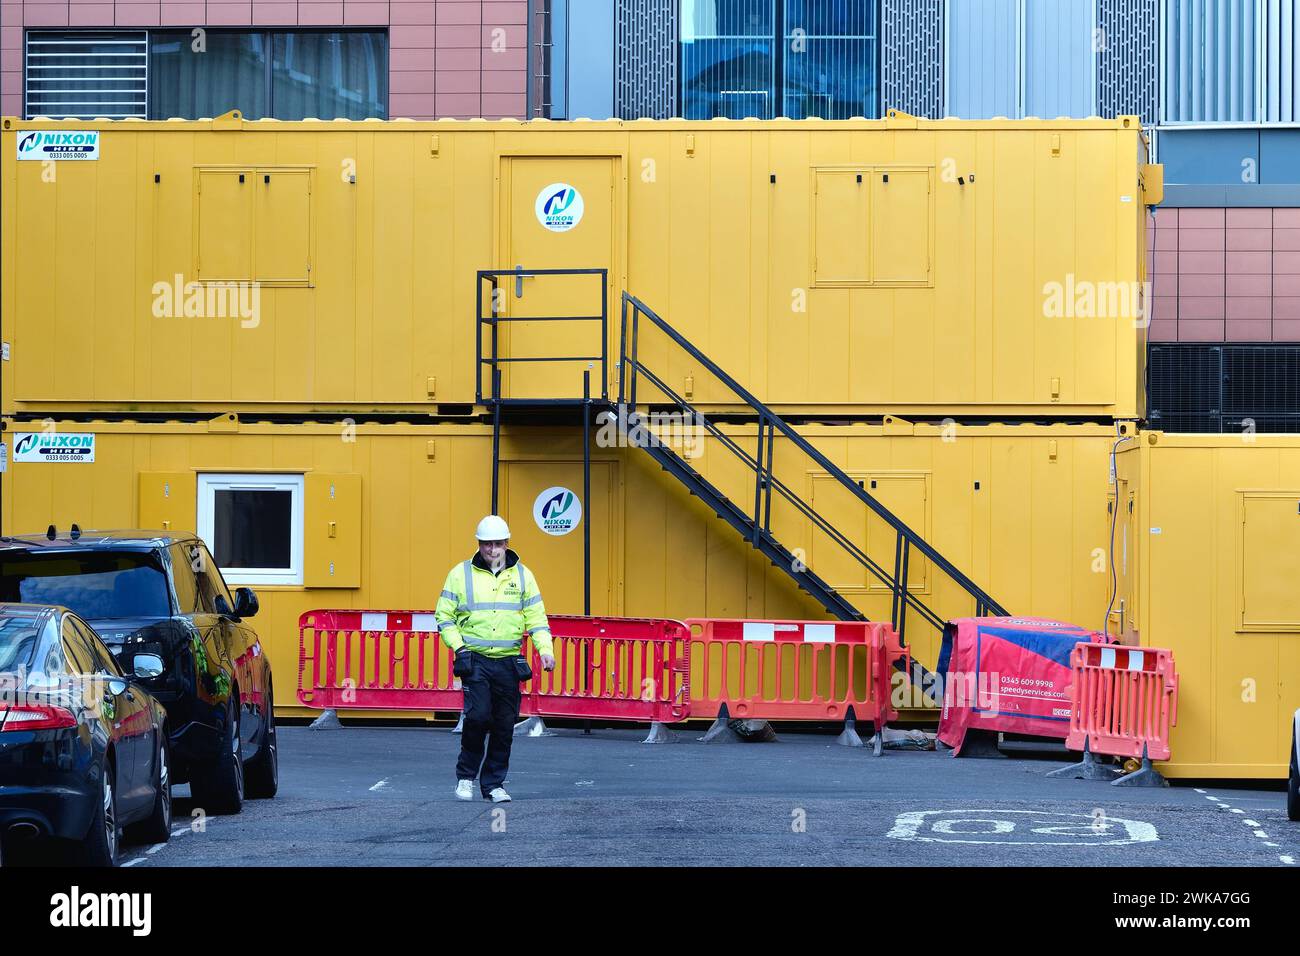 Temporary large yellow builders cabins creating abstract shapes with worker in high viz jacket and hard hat in Leyden Street Aldgate London England Stock Photo